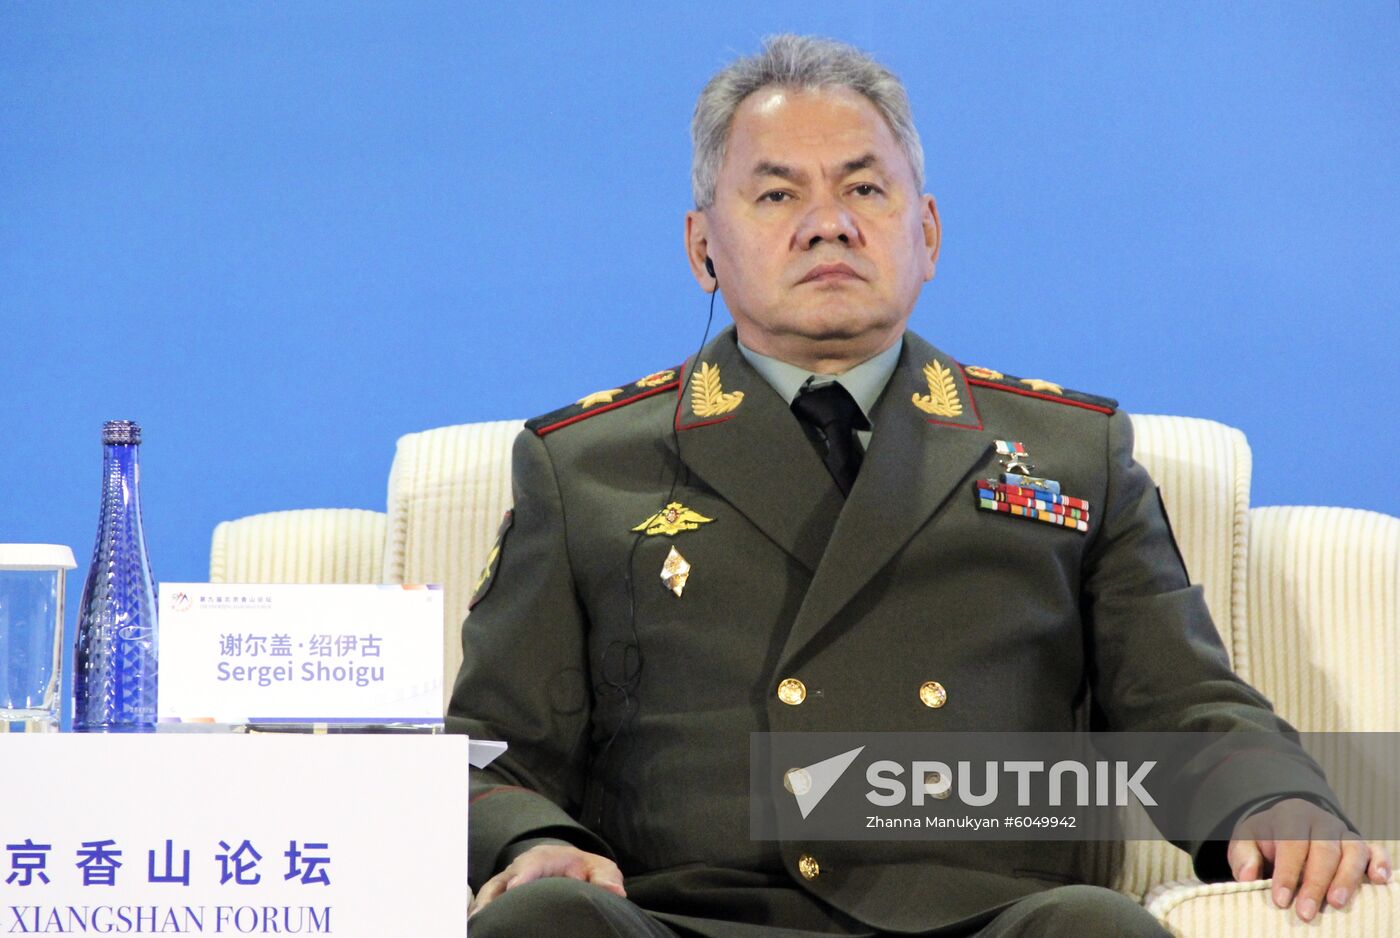 China Russia Security Forum